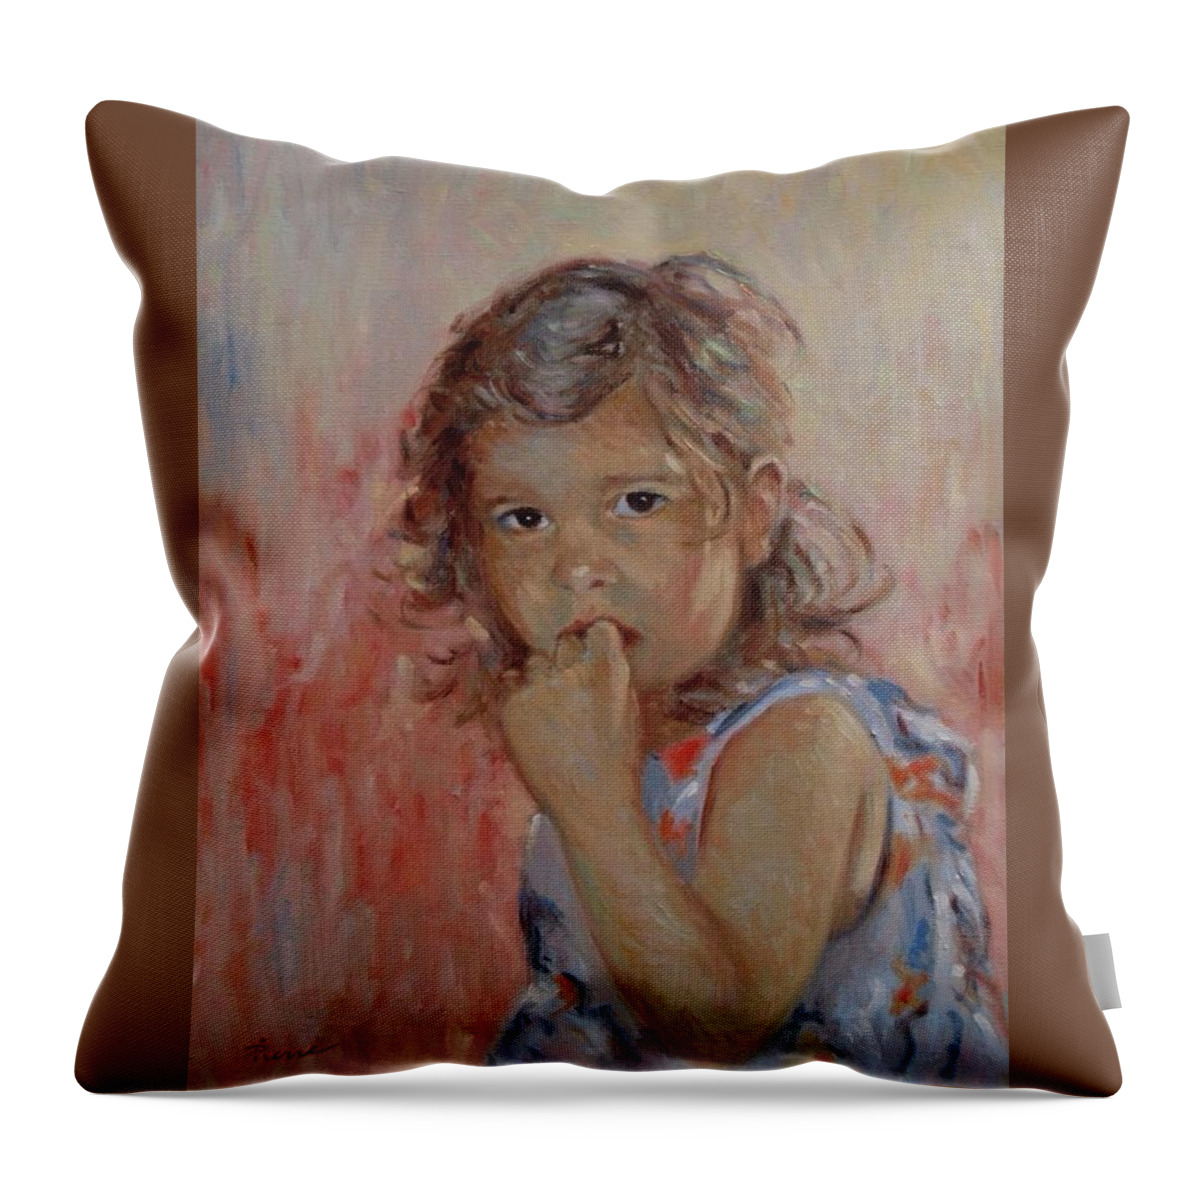 Girls Throw Pillow featuring the painting My little baby by Pierre Dijk